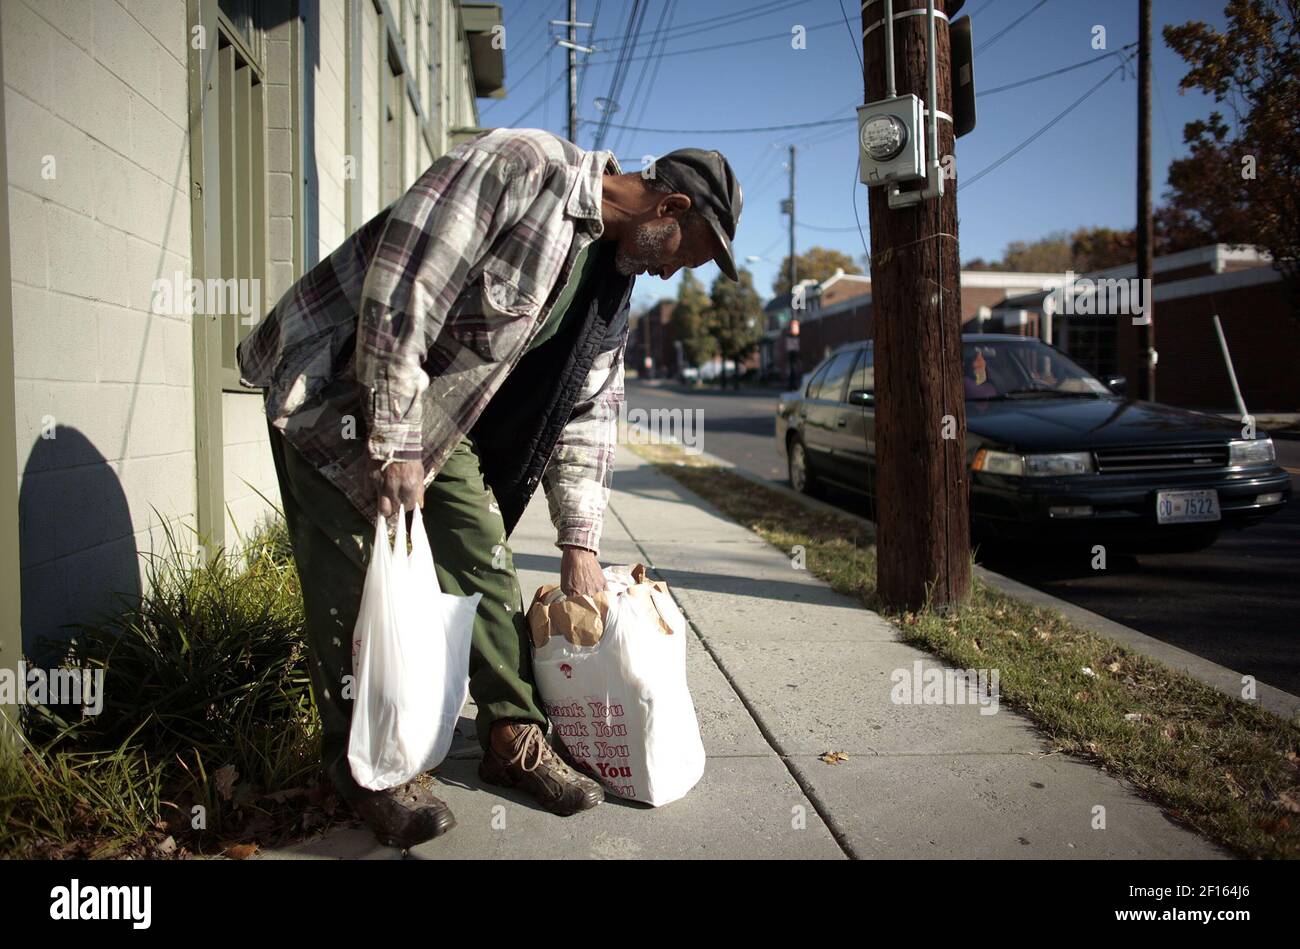 John Treece, 60, leaves the Bread for the City food pantry in the Anacostia section of Washington, DC, on November 2, 2006. The share of poor Americans living in deep poverty has reached a 32-year high, while millions of middle-income Americans have fallen closer to the poverty line due to what one researcher calls a 'sinkhole effect' on income. Washington, D.C., has the highest concentration of severely poor people among all states, 10.8 percent. (Photo by Chuck Kennedy/MCT/Sipa USA) Stock Photo